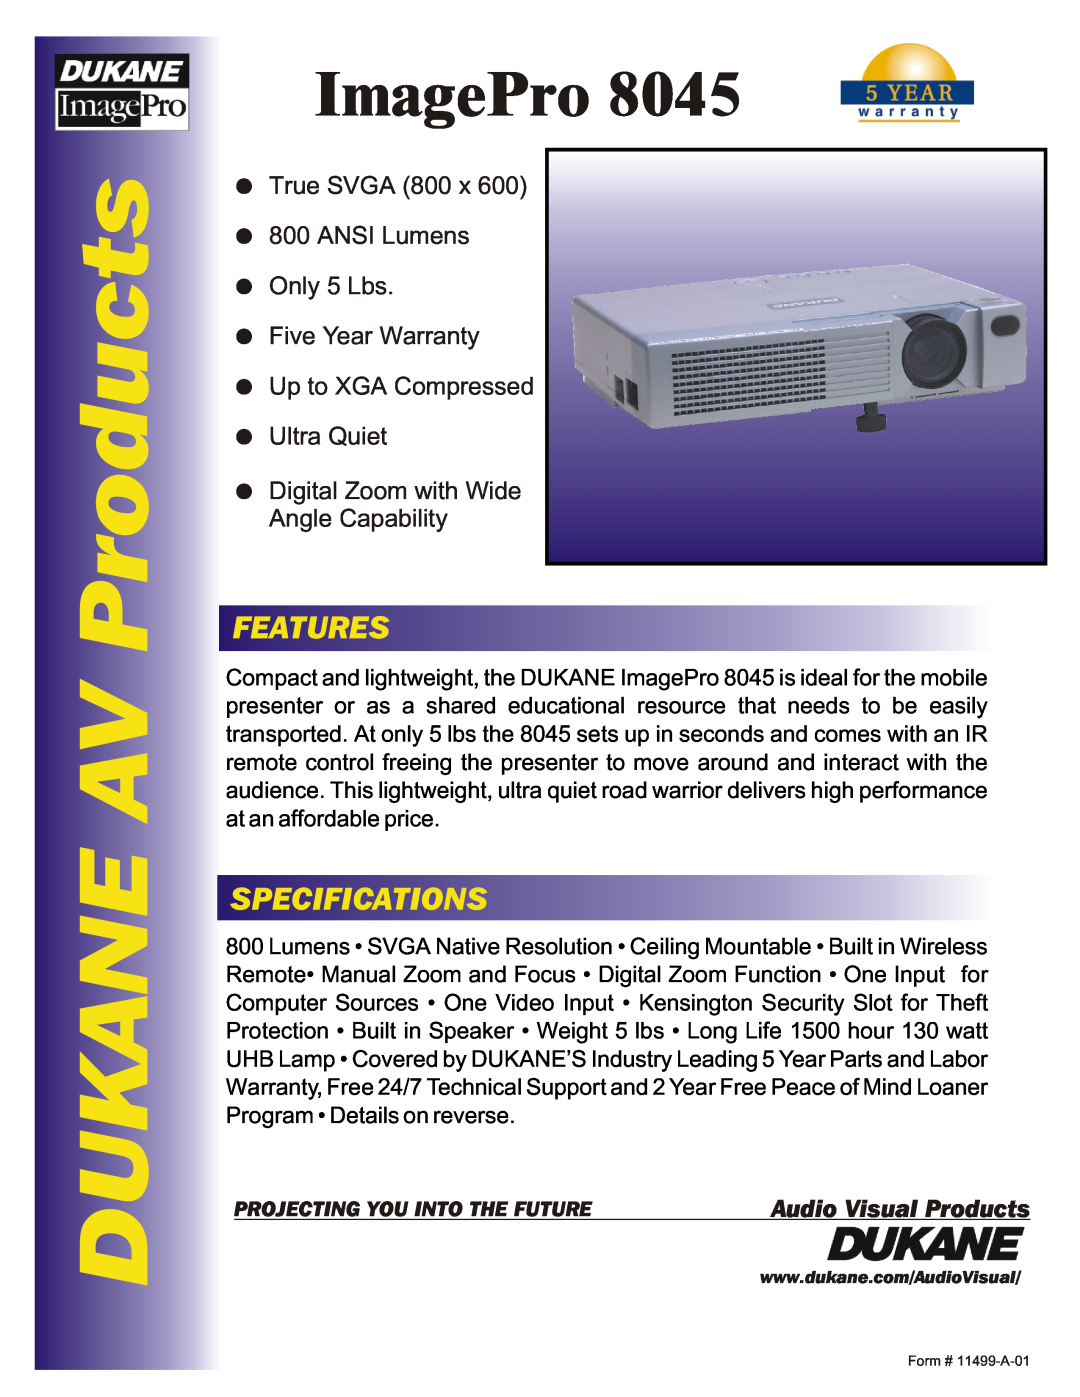 Dukane 8045 specifications DUKANE AV Products, ImagePro, Features, Specifications, Up to XGA Compressed Ultra Quiet 